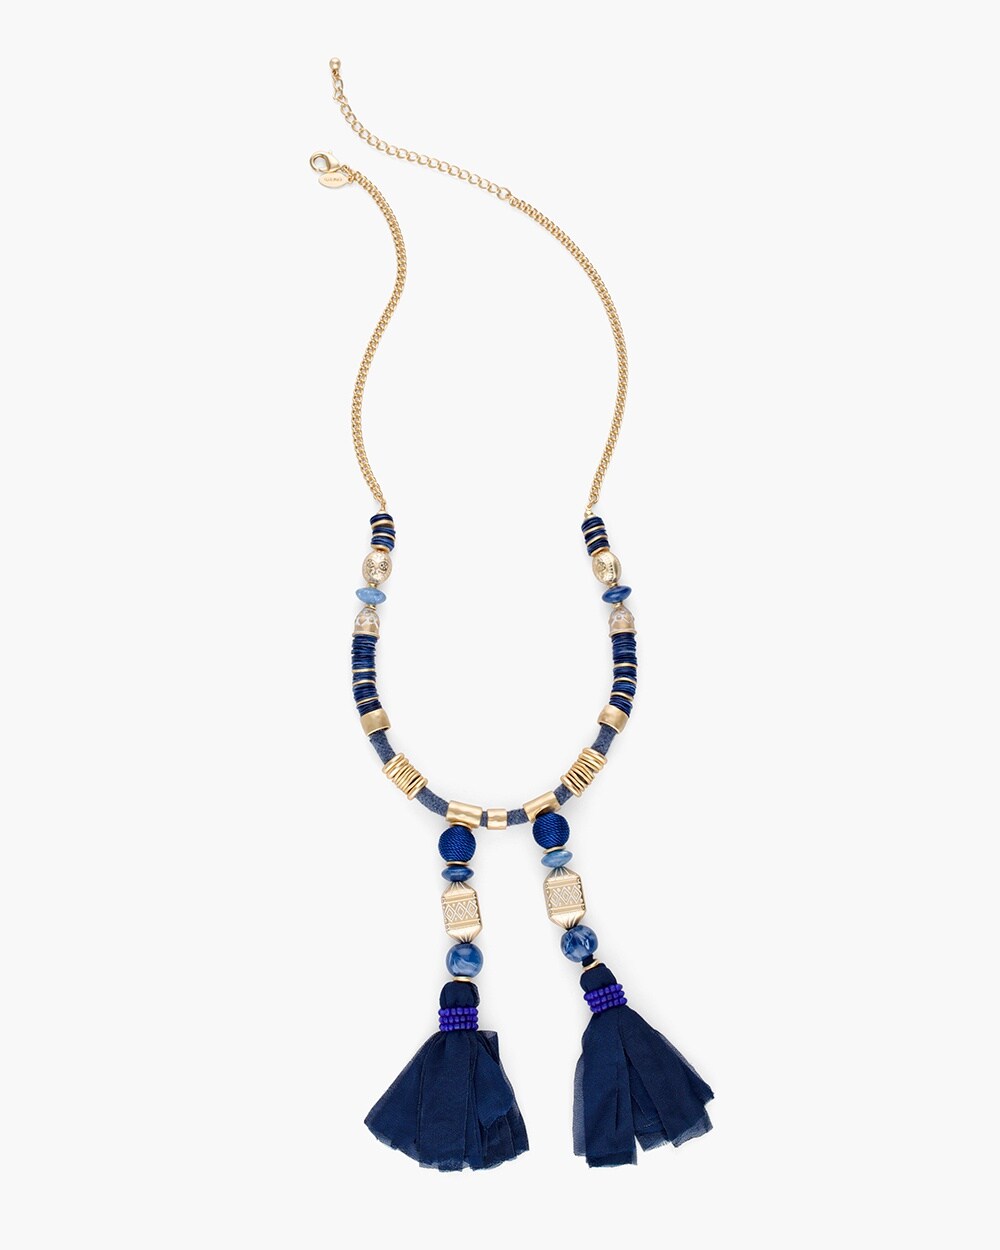 Blue and Gold-Tone Interrupter Necklace